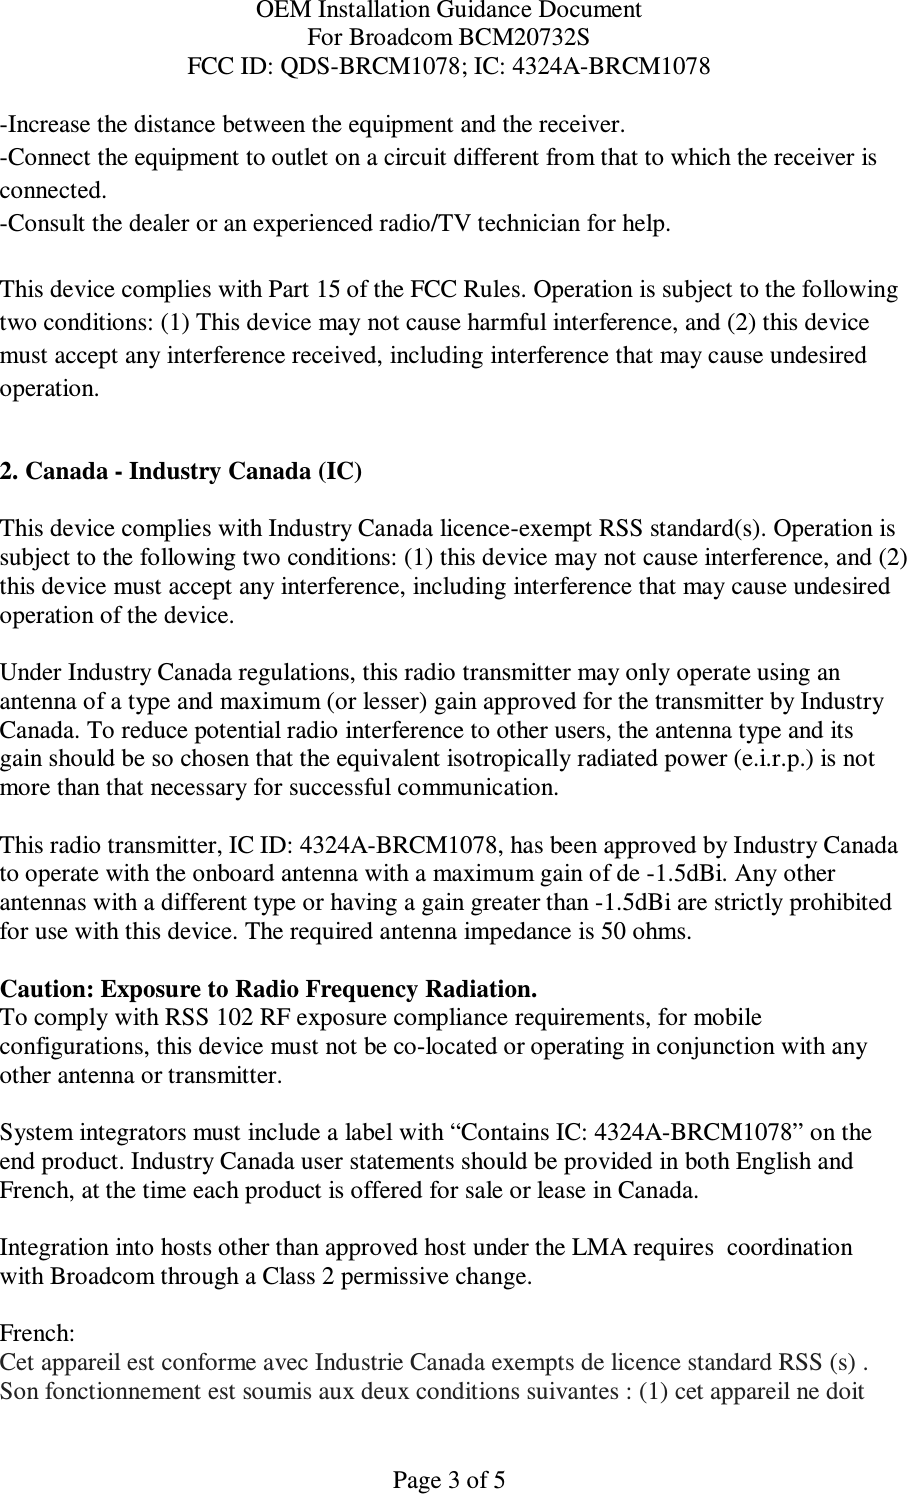 OEM Installation Guidance Document For Broadcom BCM20732S FCC ID: QDS-BRCM1078; IC: 4324A-BRCM1078  Page 3 of 5 -Increase the distance between the equipment and the receiver. -Connect the equipment to outlet on a circuit different from that to which the receiver is connected. -Consult the dealer or an experienced radio/TV technician for help.  This device complies with Part 15 of the FCC Rules. Operation is subject to the following two conditions: (1) This device may not cause harmful interference, and (2) this device must accept any interference received, including interference that may cause undesired operation.  2. Canada - Industry Canada (IC)  This device complies with Industry Canada licence-exempt RSS standard(s). Operation is subject to the following two conditions: (1) this device may not cause interference, and (2) this device must accept any interference, including interference that may cause undesired operation of the device.  Under Industry Canada regulations, this radio transmitter may only operate using an antenna of a type and maximum (or lesser) gain approved for the transmitter by Industry Canada. To reduce potential radio interference to other users, the antenna type and its gain should be so chosen that the equivalent isotropically radiated power (e.i.r.p.) is not more than that necessary for successful communication.  This radio transmitter, IC ID: 4324A-BRCM1078, has been approved by Industry Canada to operate with the onboard antenna with a maximum gain of de -1.5dBi. Any other antennas with a different type or having a gain greater than -1.5dBi are strictly prohibited for use with this device. The required antenna impedance is 50 ohms.  Caution: Exposure to Radio Frequency Radiation. To comply with RSS 102 RF exposure compliance requirements, for mobile configurations, this device must not be co-located or operating in conjunction with any other antenna or transmitter.  System integrators must include a label with “Contains IC: 4324A-BRCM1078” on the end product. Industry Canada user statements should be provided in both English and French, at the time each product is offered for sale or lease in Canada.   Integration into hosts other than approved host under the LMA requires  coordination with Broadcom through a Class 2 permissive change.   French:  Cet appareil est conforme avec Industrie Canada exempts de licence standard RSS (s) . Son fonctionnement est soumis aux deux conditions suivantes : (1) cet appareil ne doit 